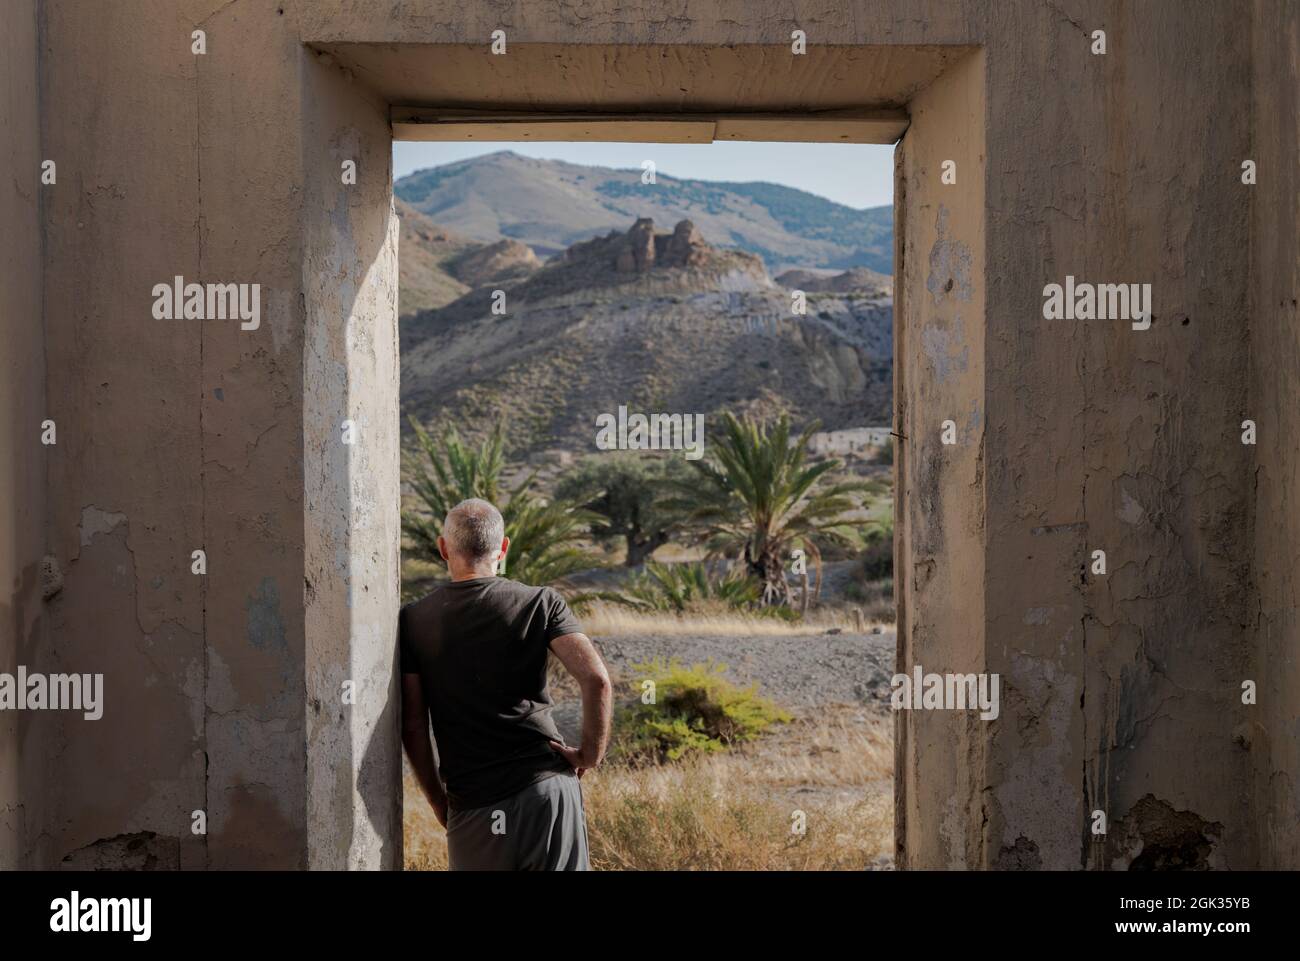 Rear view of adult man standing in doorway of an abandoned house looking at view Stock Photo